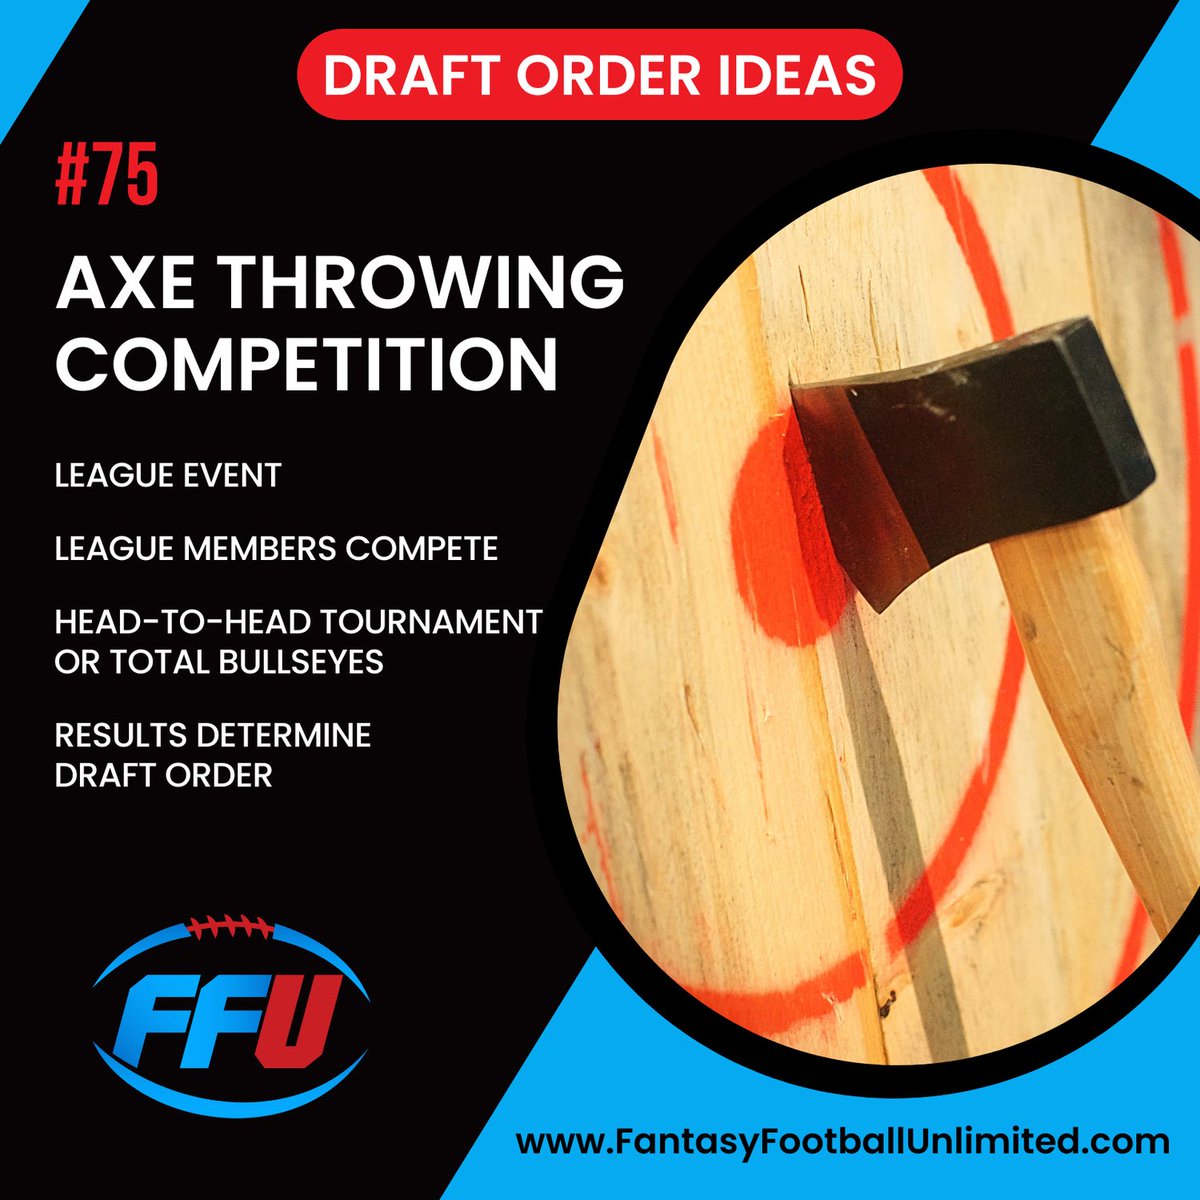 Fantasy Football League Axe 🪓 Throwing Competition- 💯 Ways to Set Fantasy Football Draft Order

Axe throwing can be such a fun event especially if fantasy draft order position is on the line!